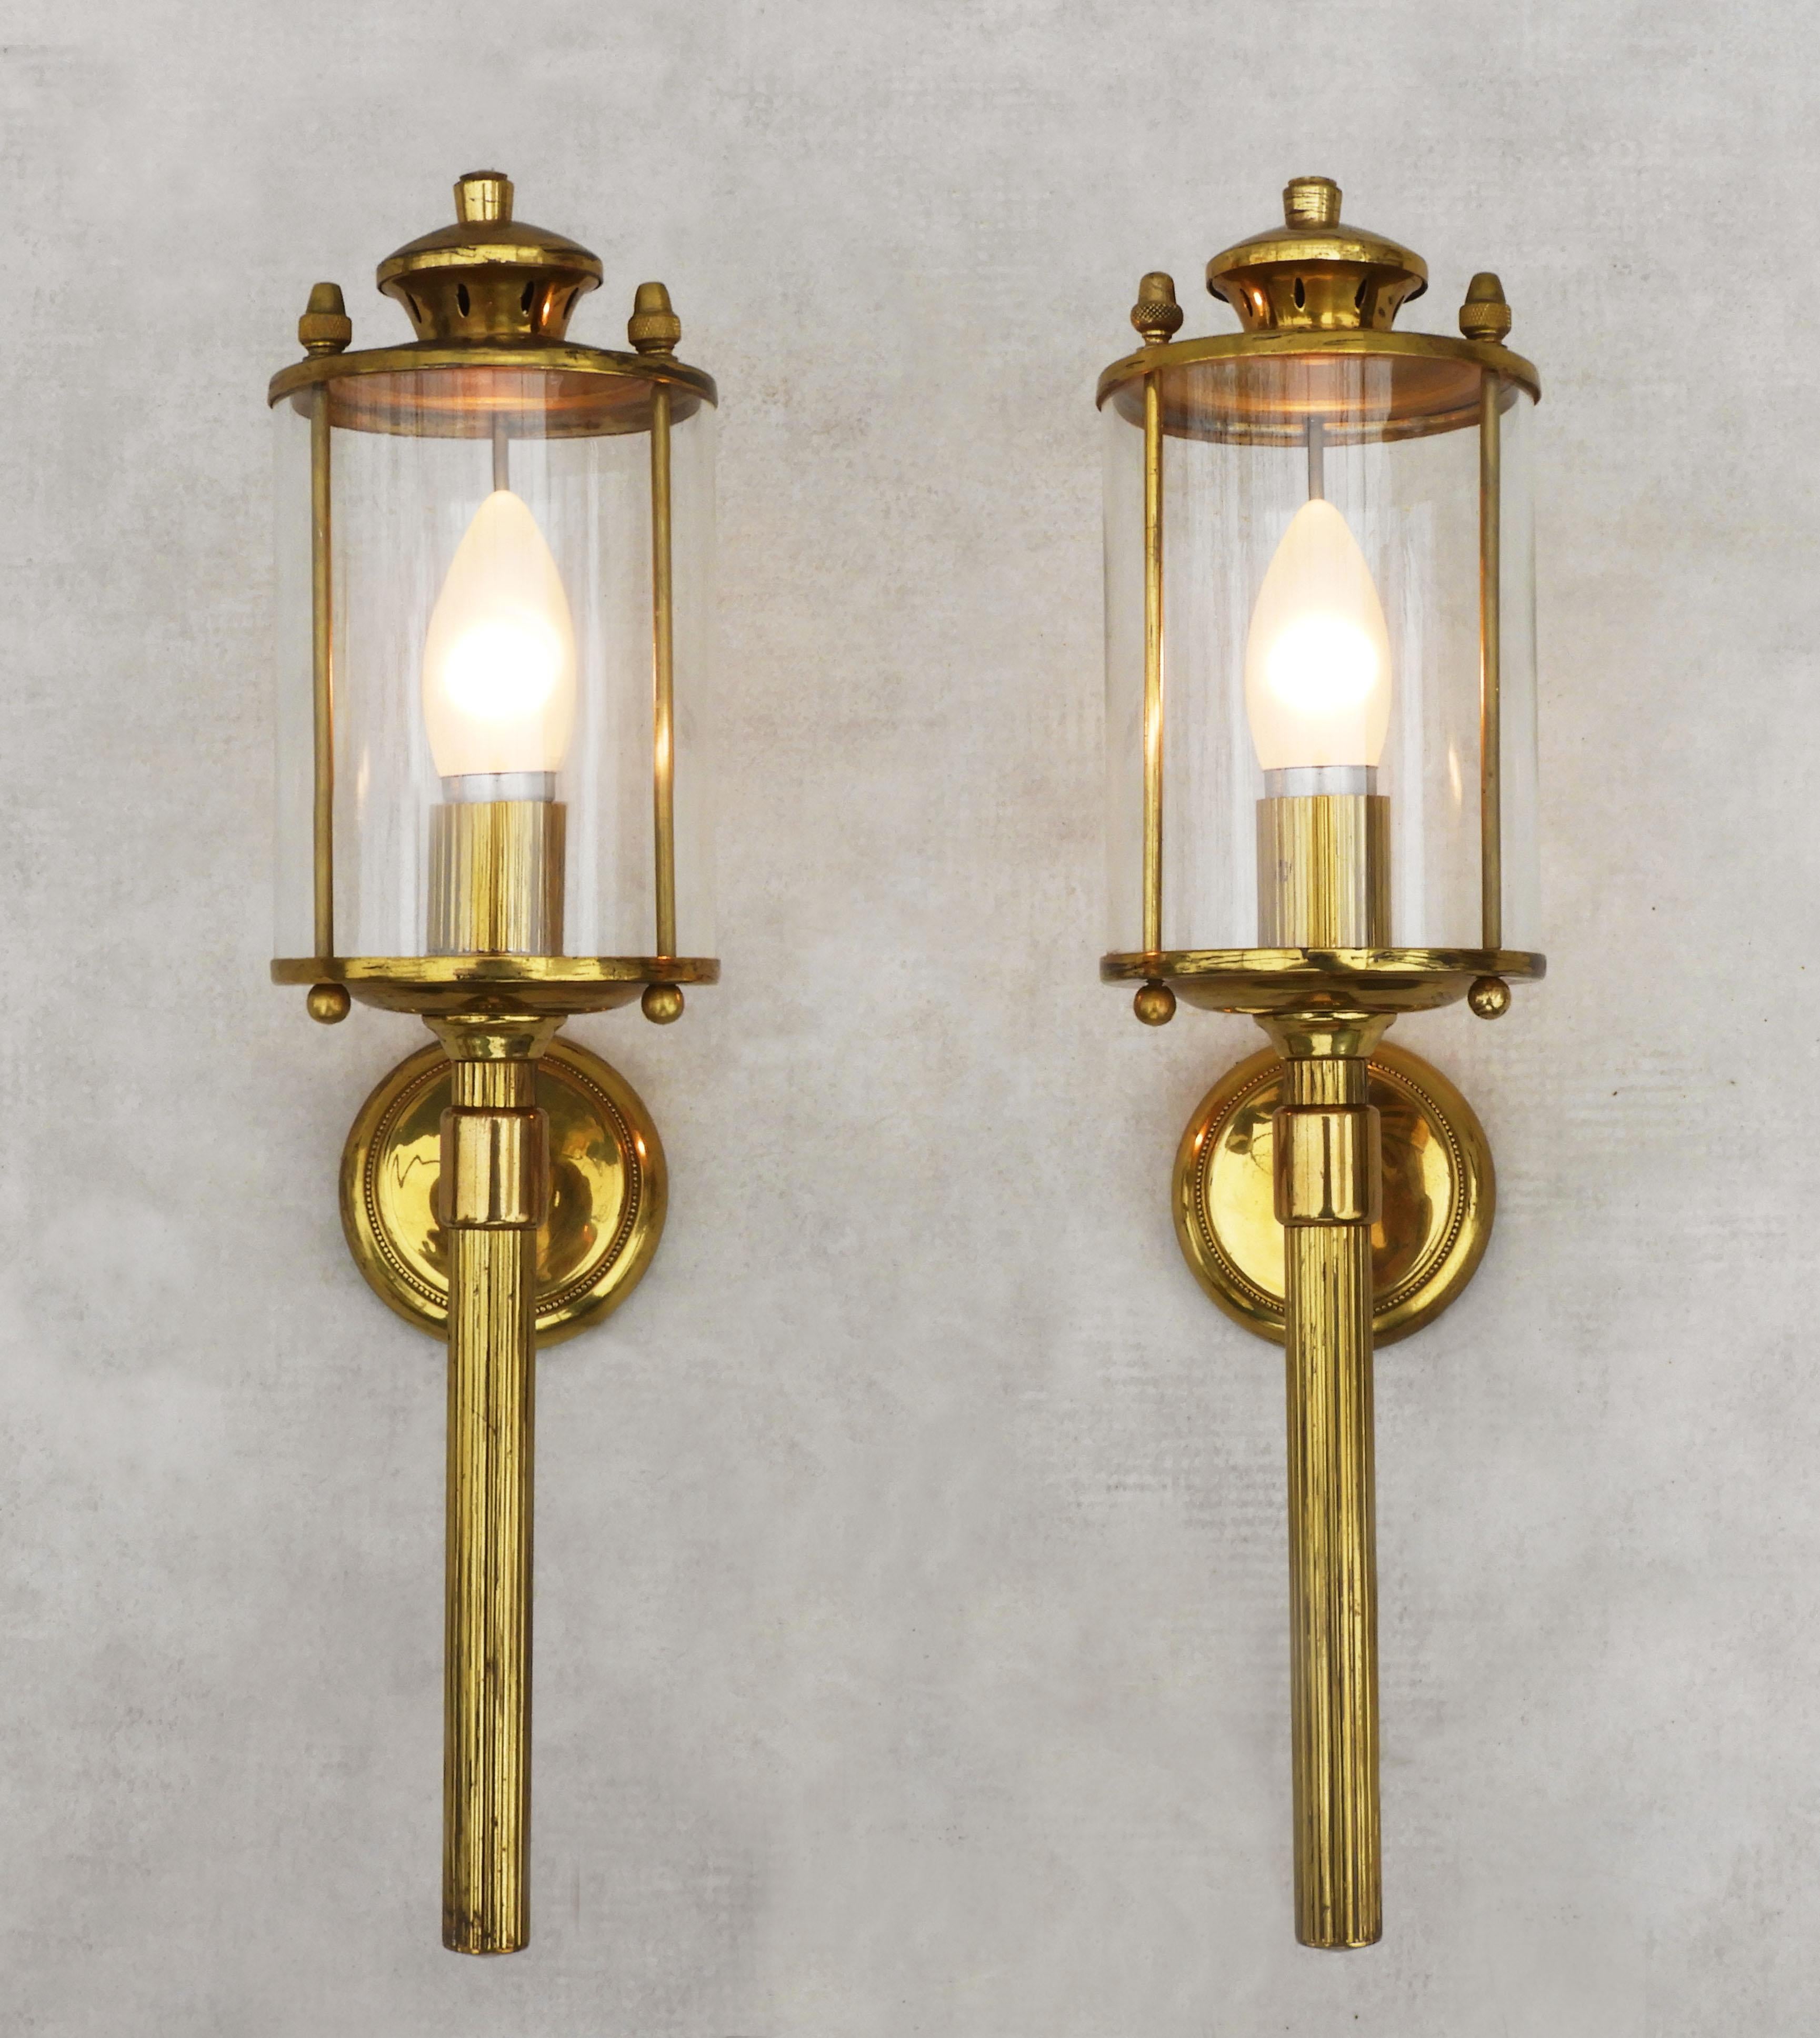 Great pair of Jansen-style brass wall lanterns from mid-century France.  A duo of torchère style lamps with cylindrical glass shades, neoclassical detailing and acorn-shaped finials.  A stylish, French, sophisticated modern take on a timeless